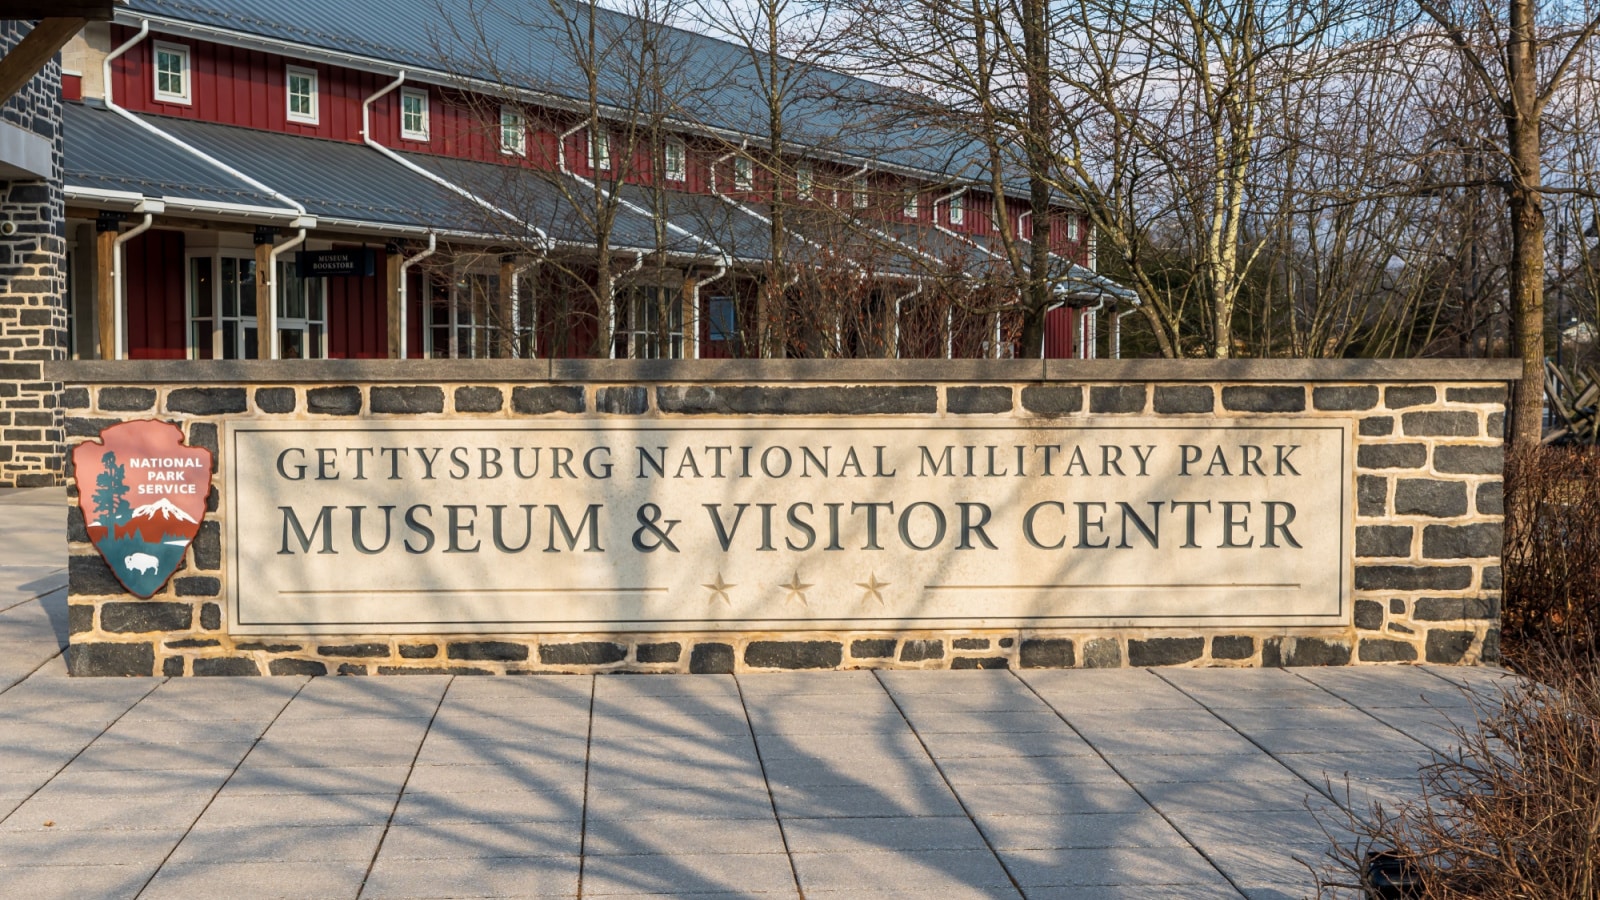 Gettysburg, Pennsylvania, USA February 8, 2022 A large sign for the Gettysburg National Military Park Museum and Visitor Center on a sunny winter day